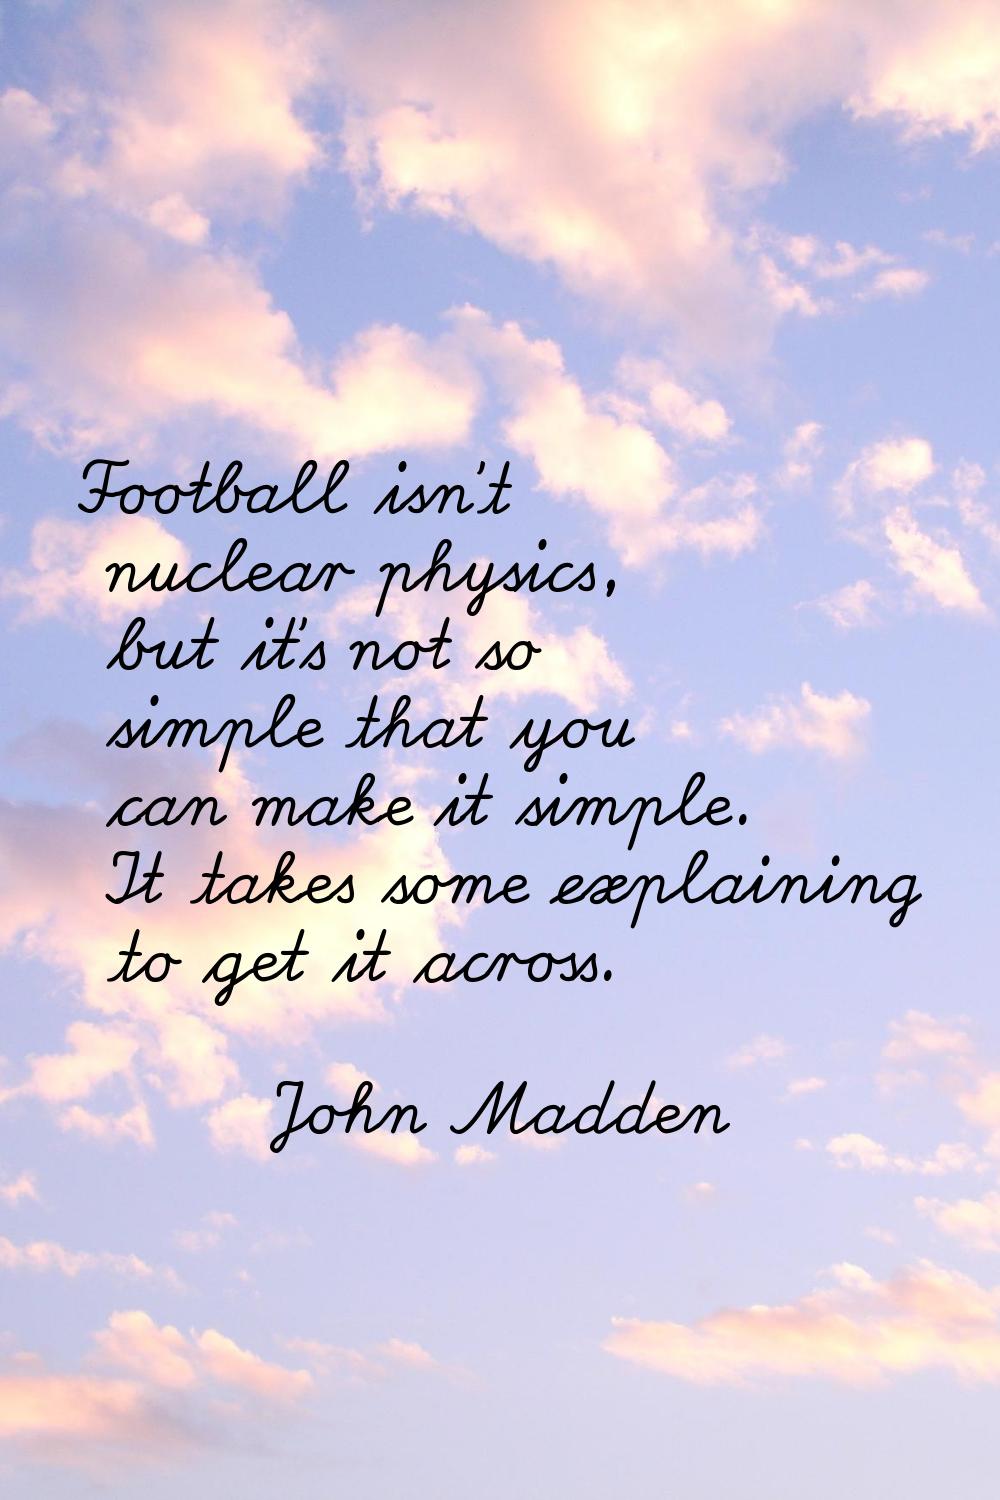 Football isn't nuclear physics, but it's not so simple that you can make it simple. It takes some e